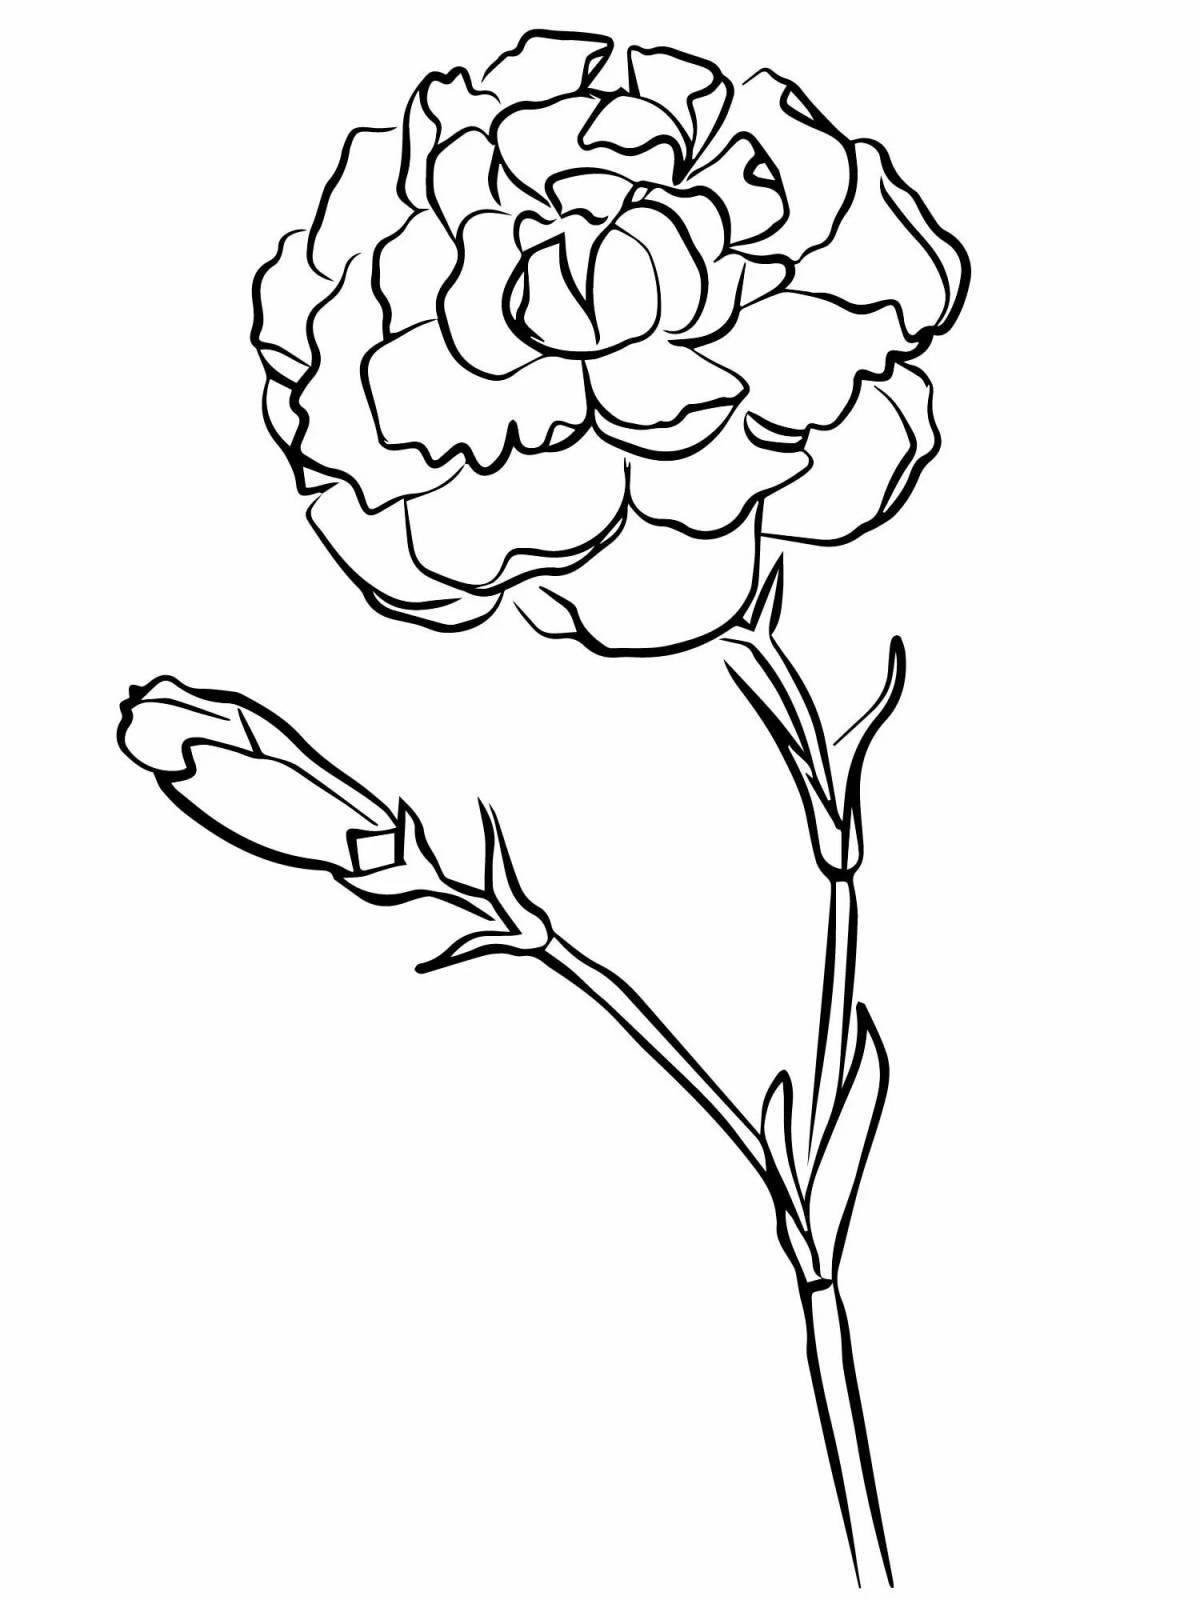 Adorable carnation coloring book for kids